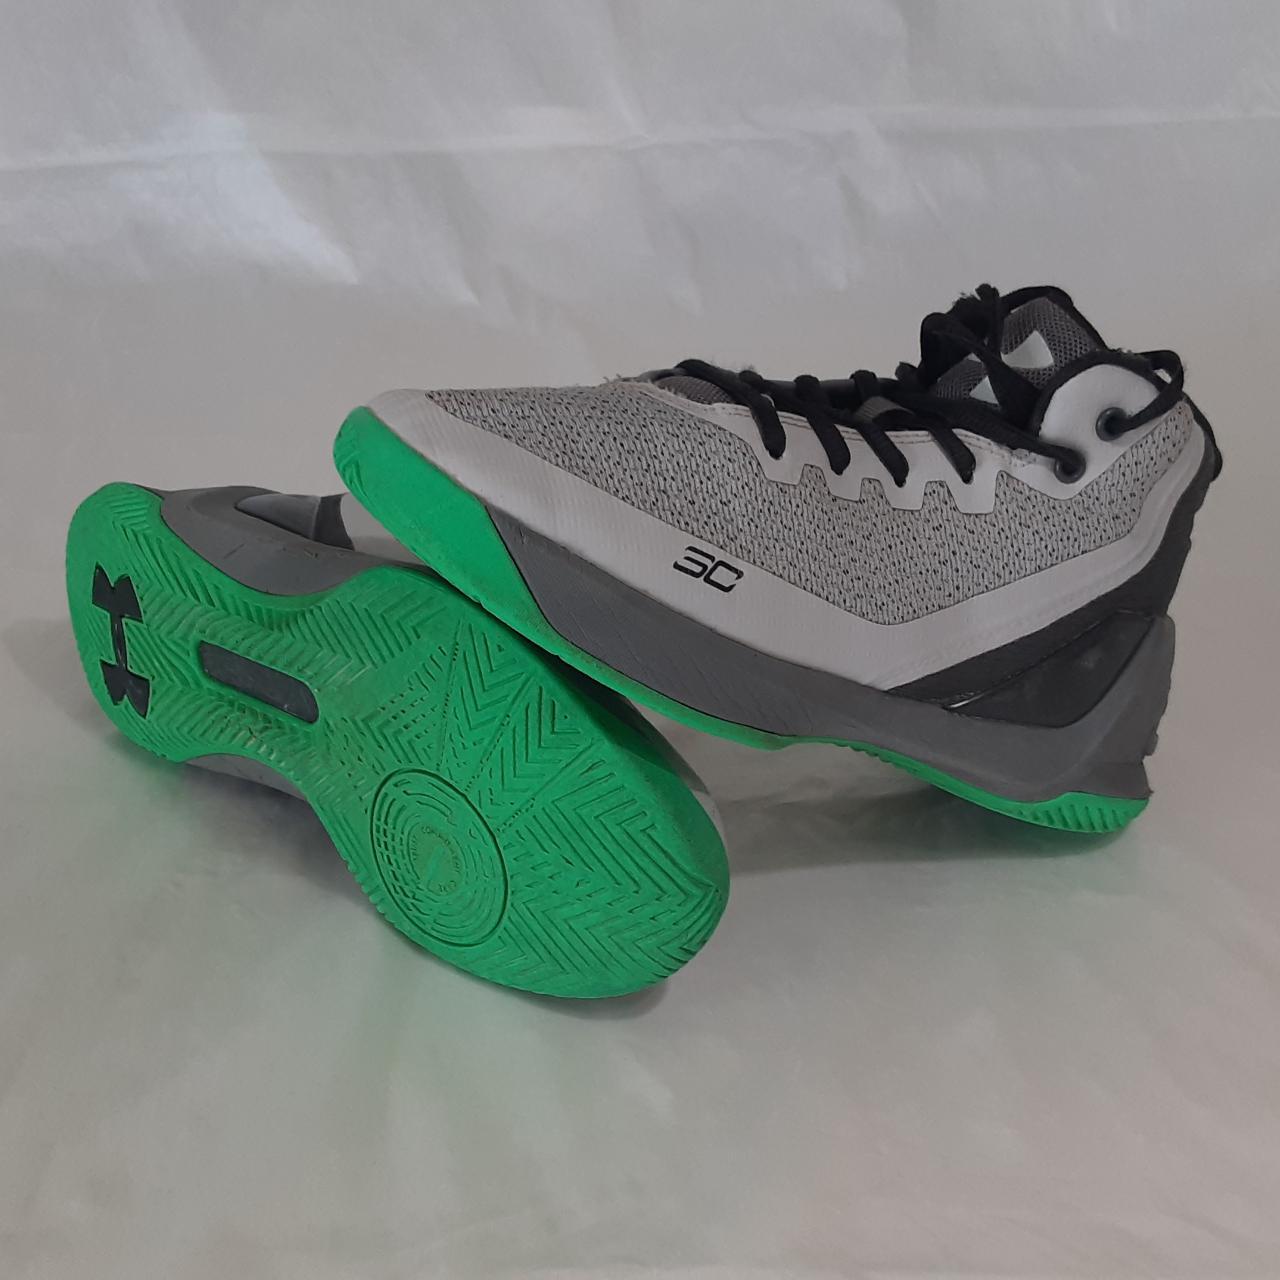 Under Armour Stephen Curry 3 Basketball Shoes Youth... - Depop